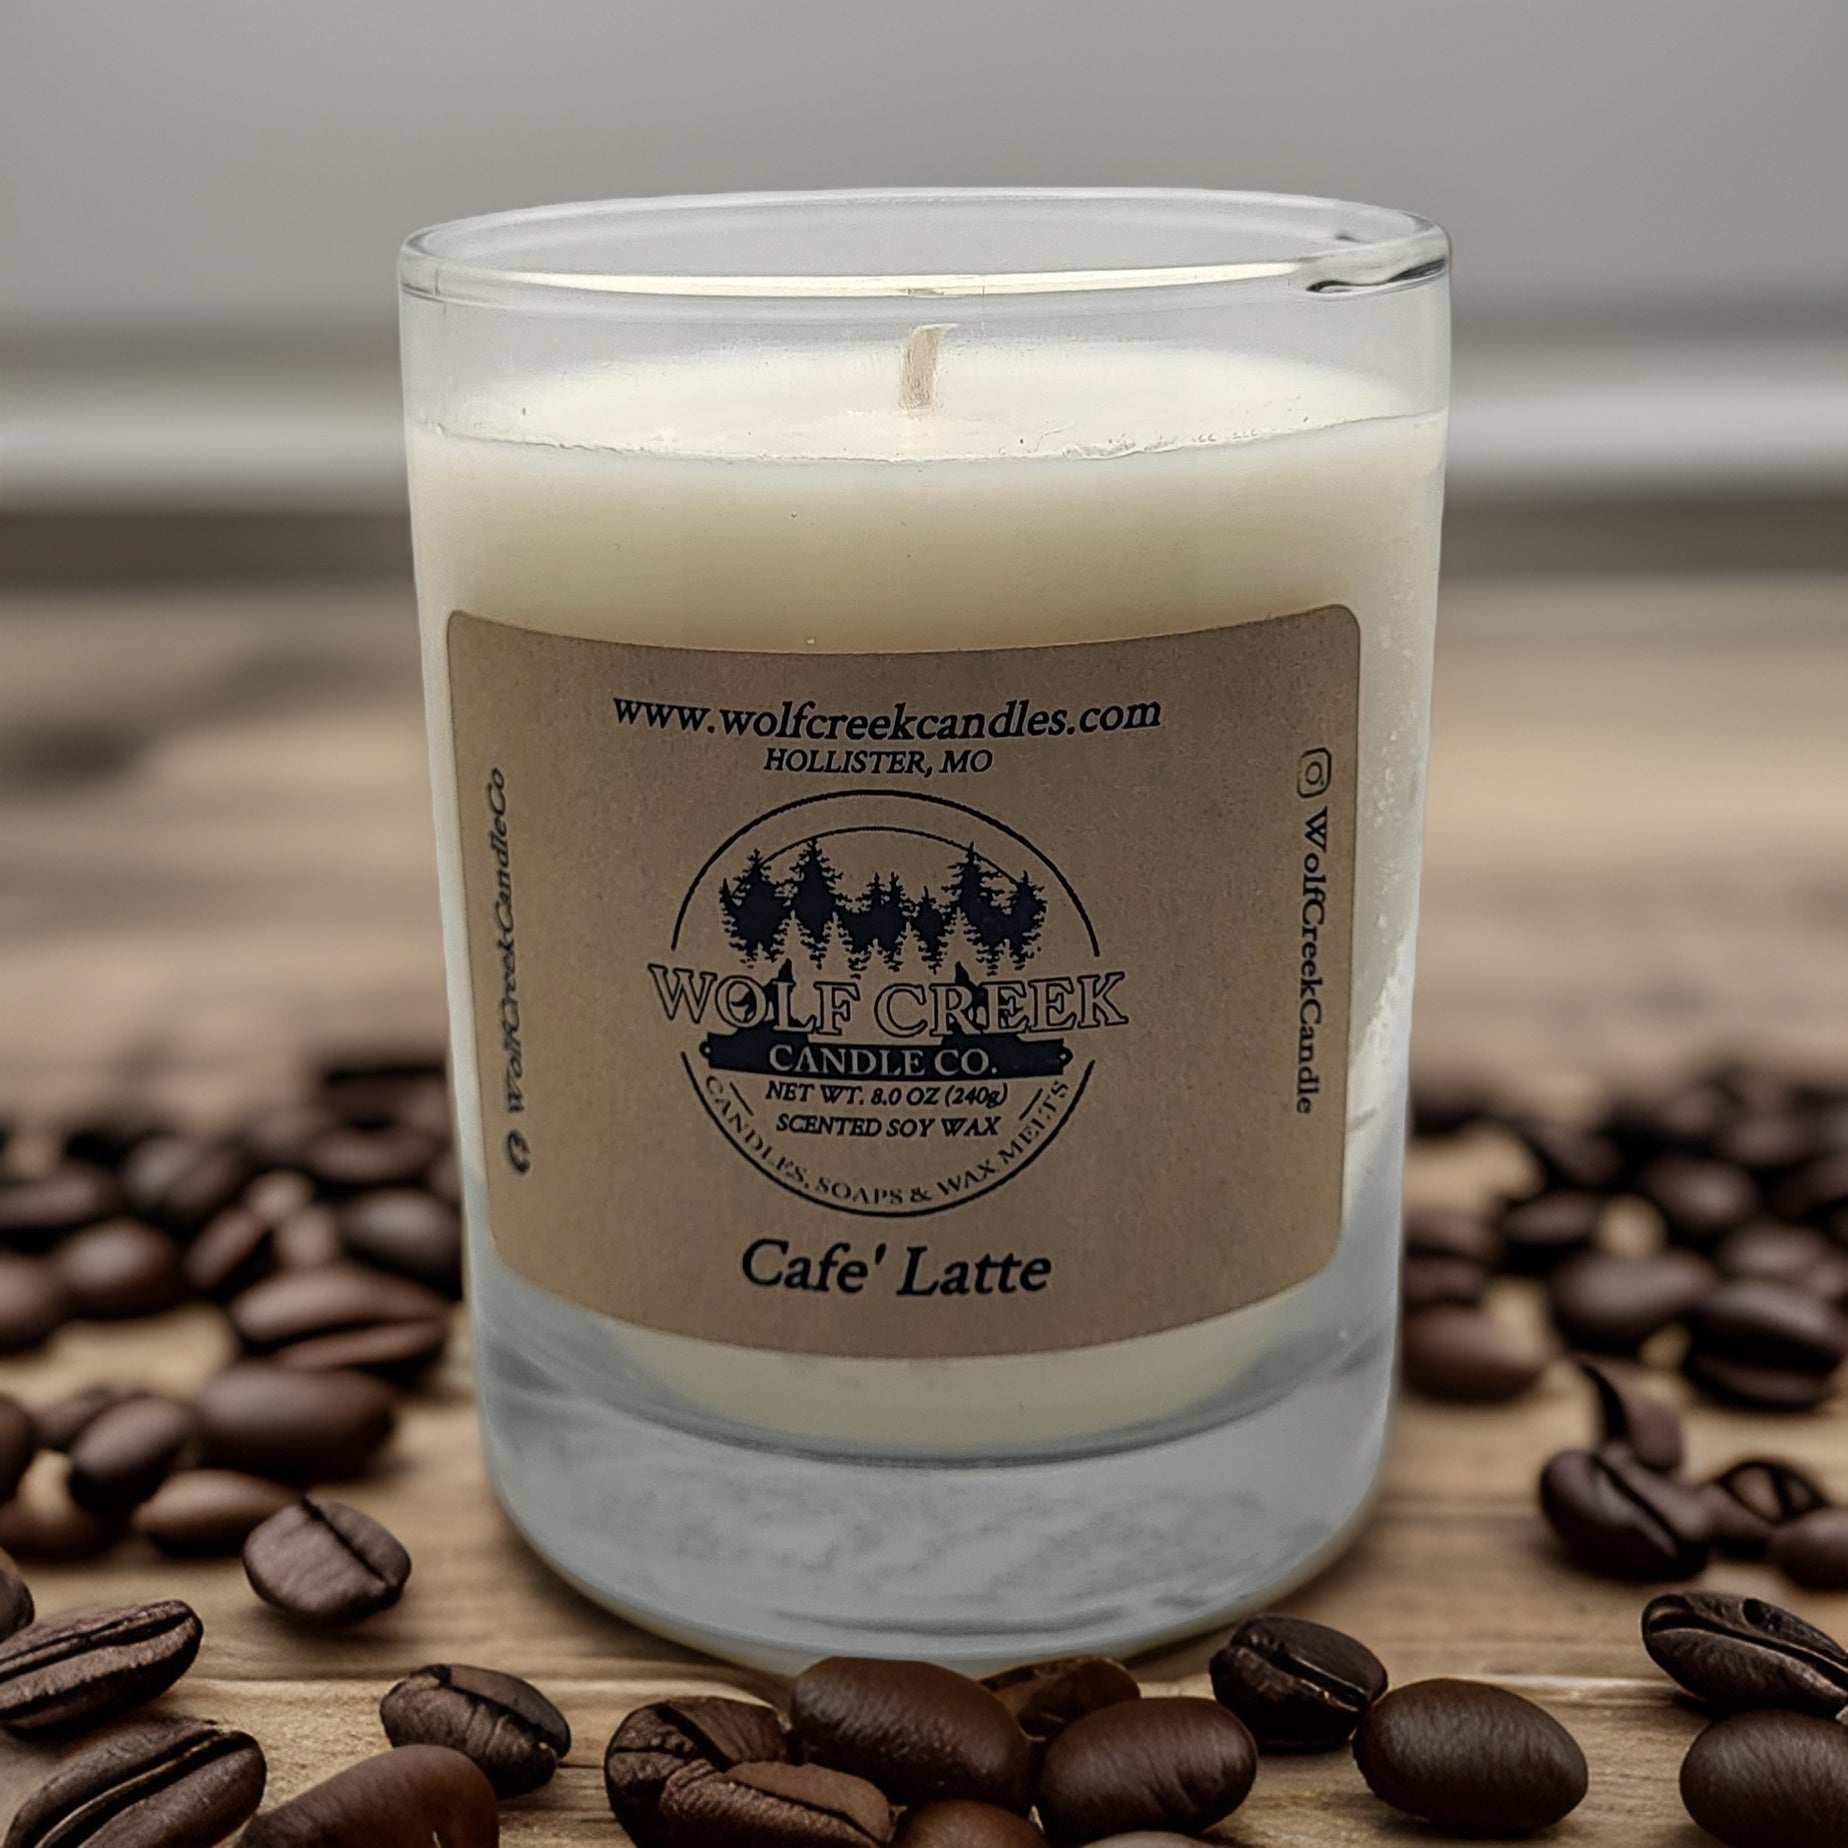 Cafe' Latte Soy Candle - Wolf Creek Candle Co.